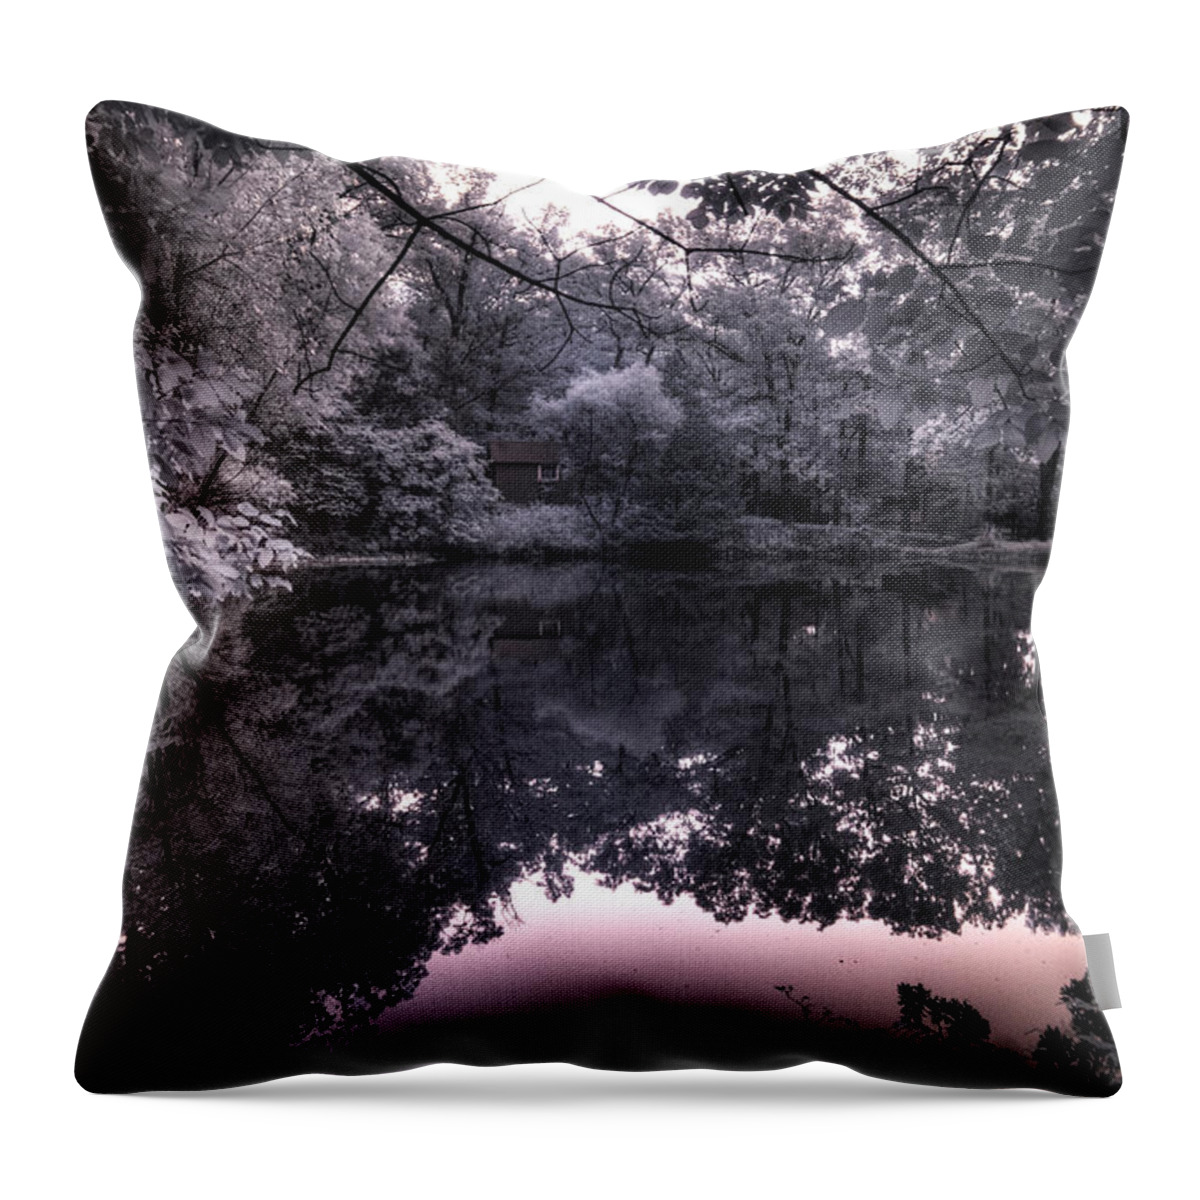 Pond Side Dusk Throw Pillow featuring the photograph Pondside Dusk by William Fields